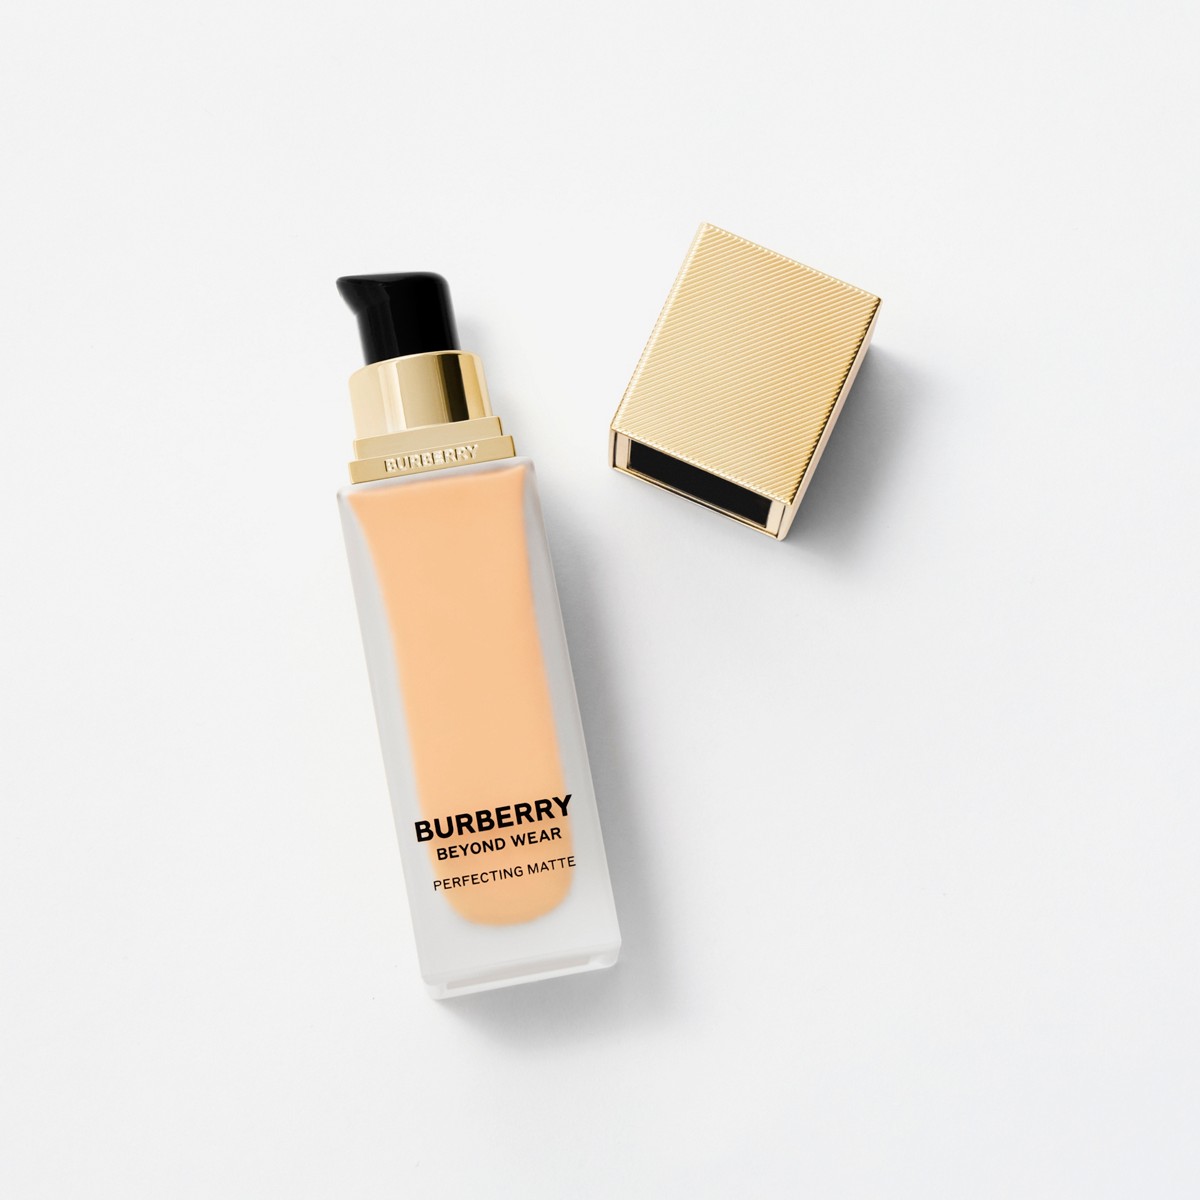 Burberry Beyond Wear Perfecting Matte Foundation - 30 Light Warm In Neutral